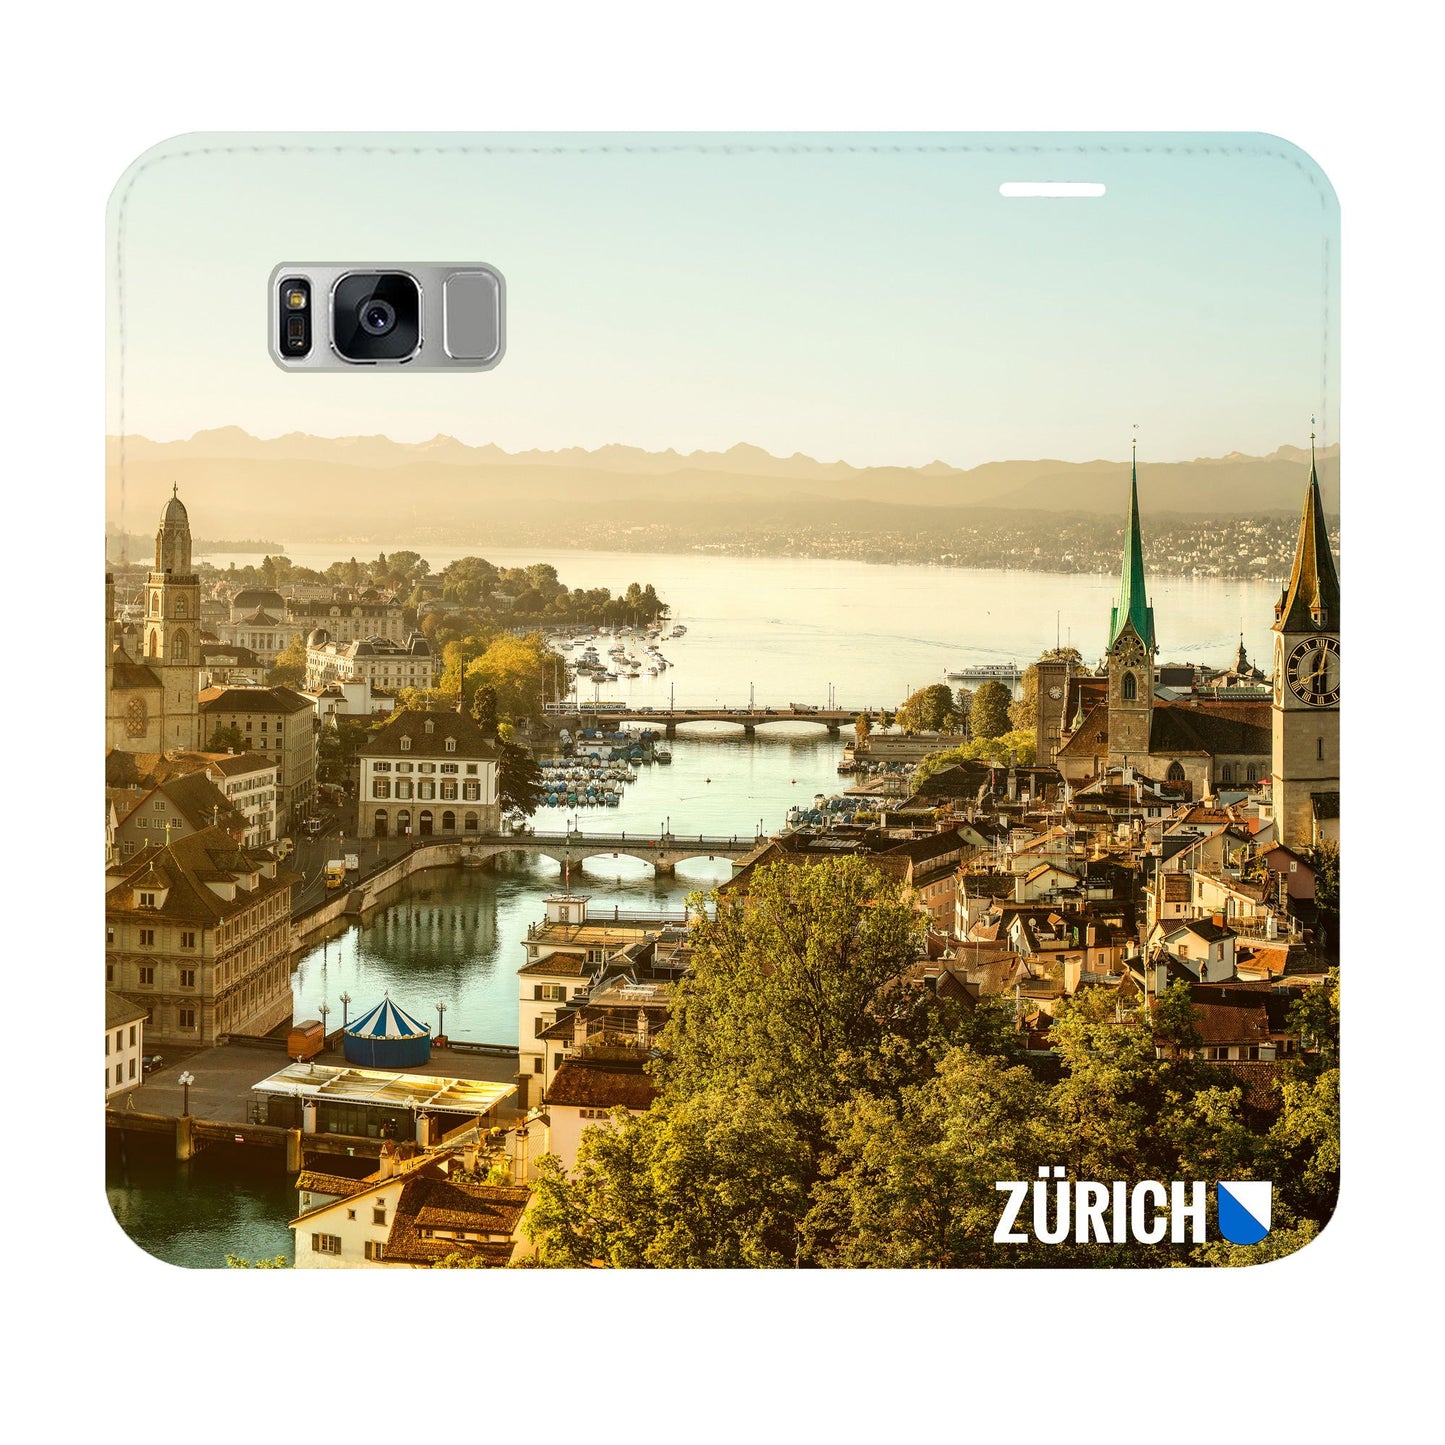 Zurich City from Above Panorama Case for Samsung Galaxy S8 Plus